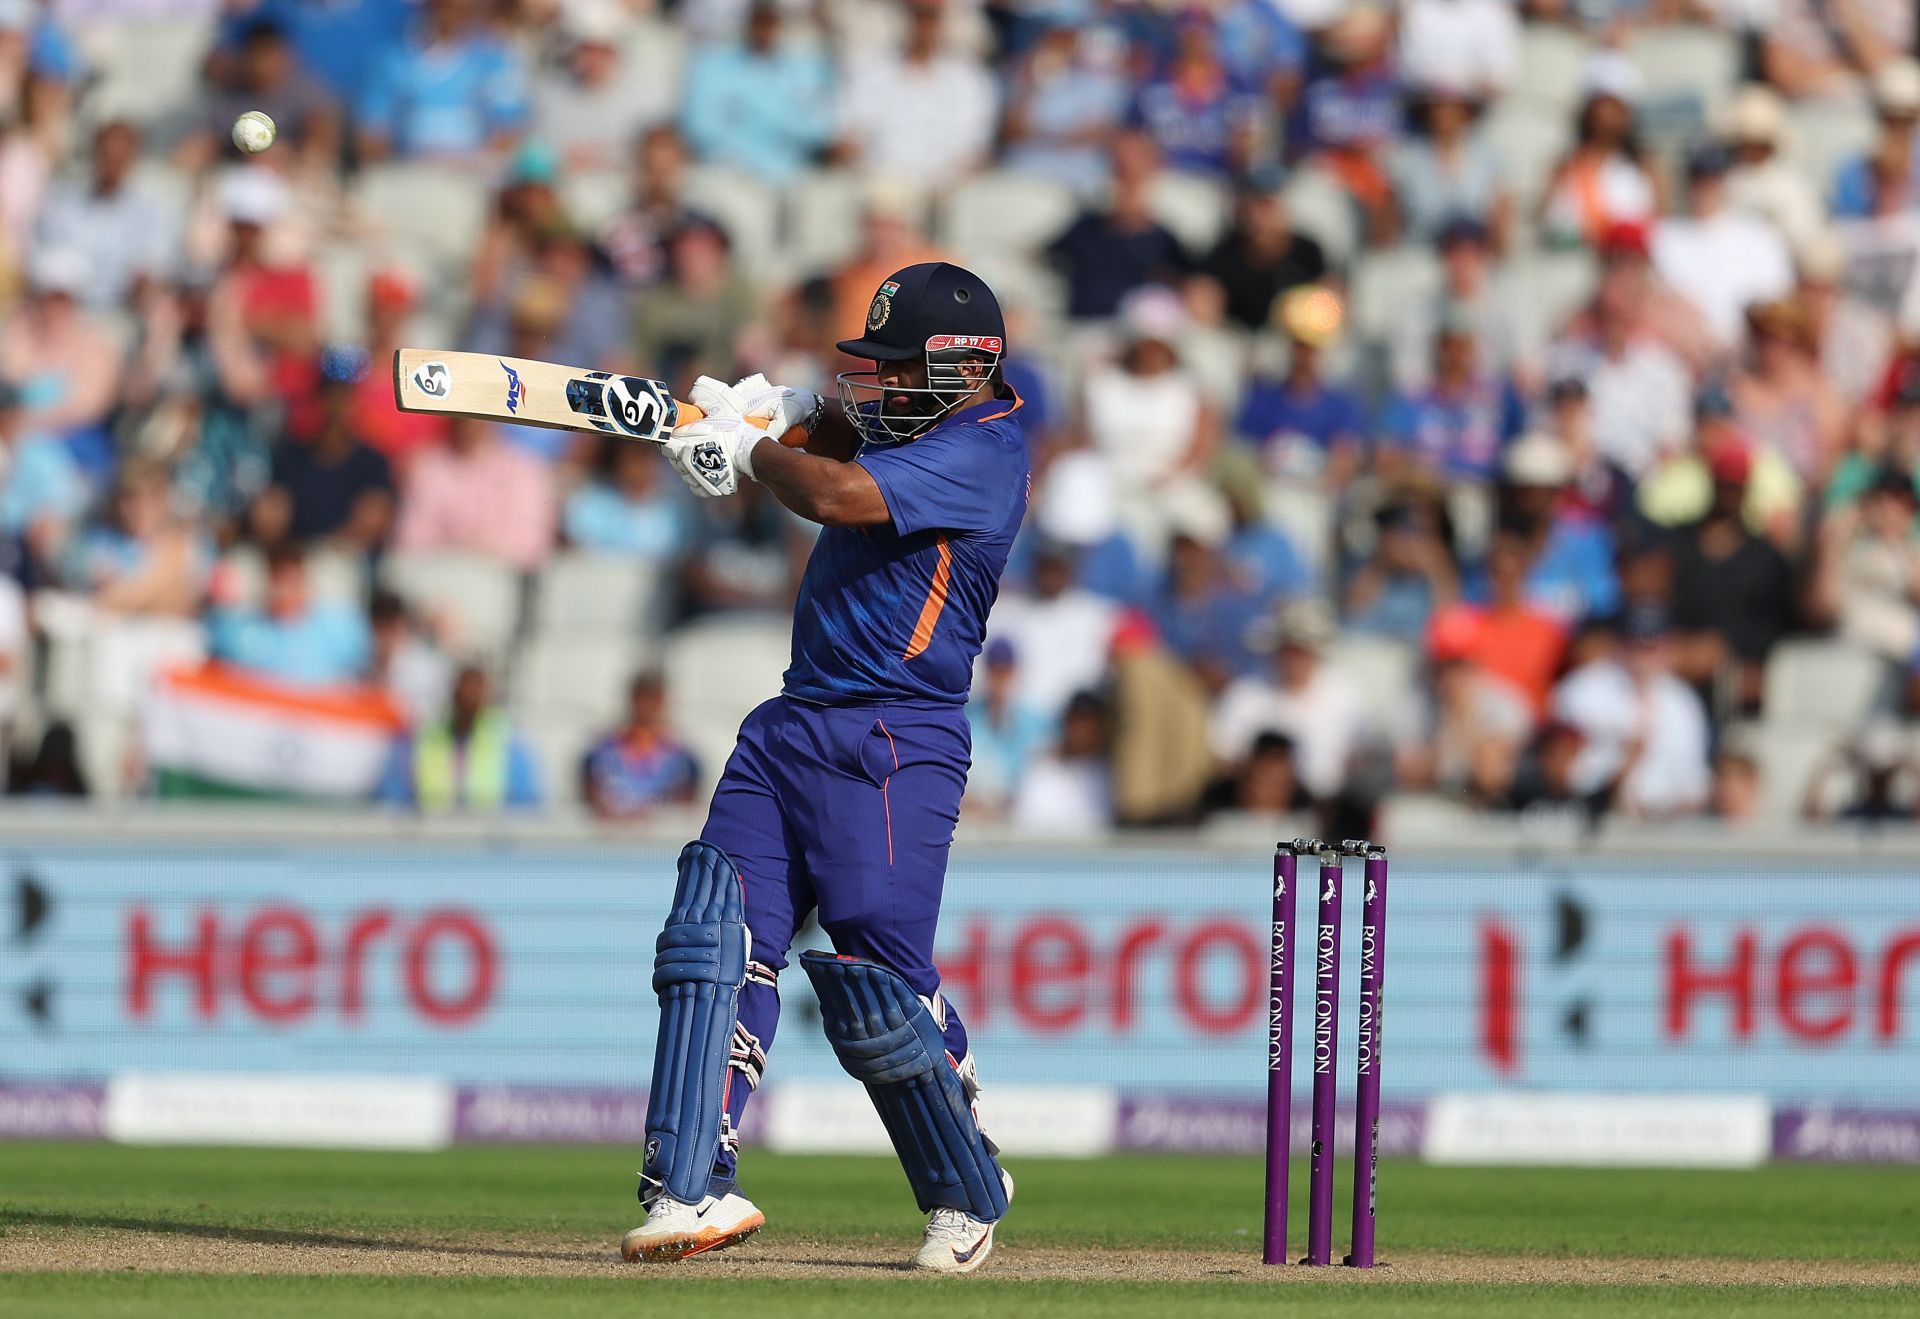 Rishabh Pant was tried as an opener ahead of the T20 World Cup.